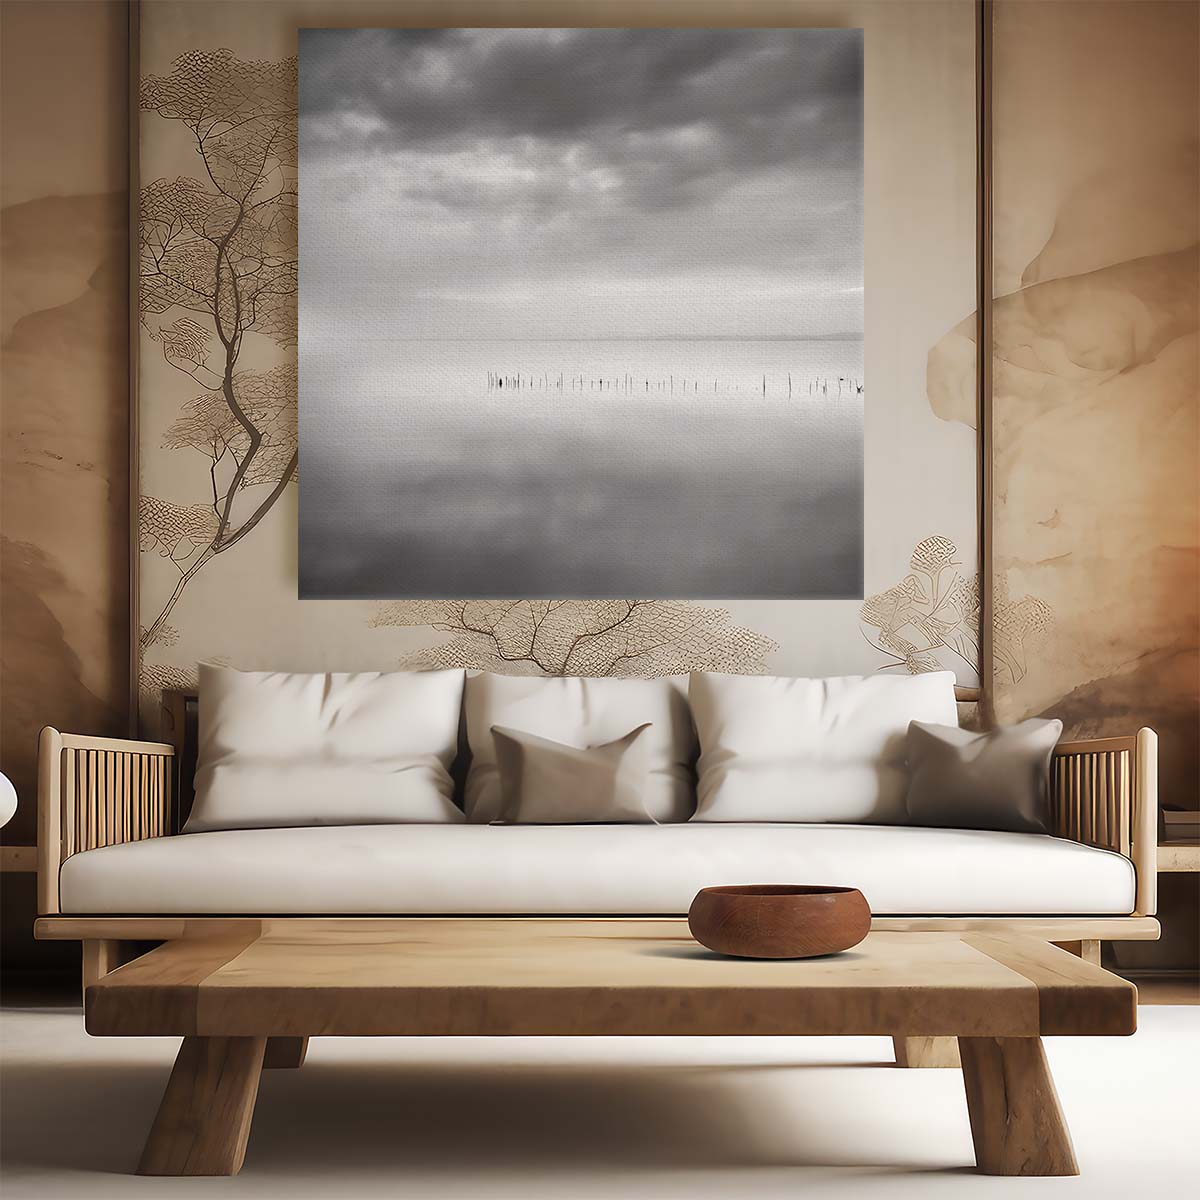 Monochrome Minimalist Lake & Sky Landscape Wall Art Photography by Luxuriance Designs. Made in USA.